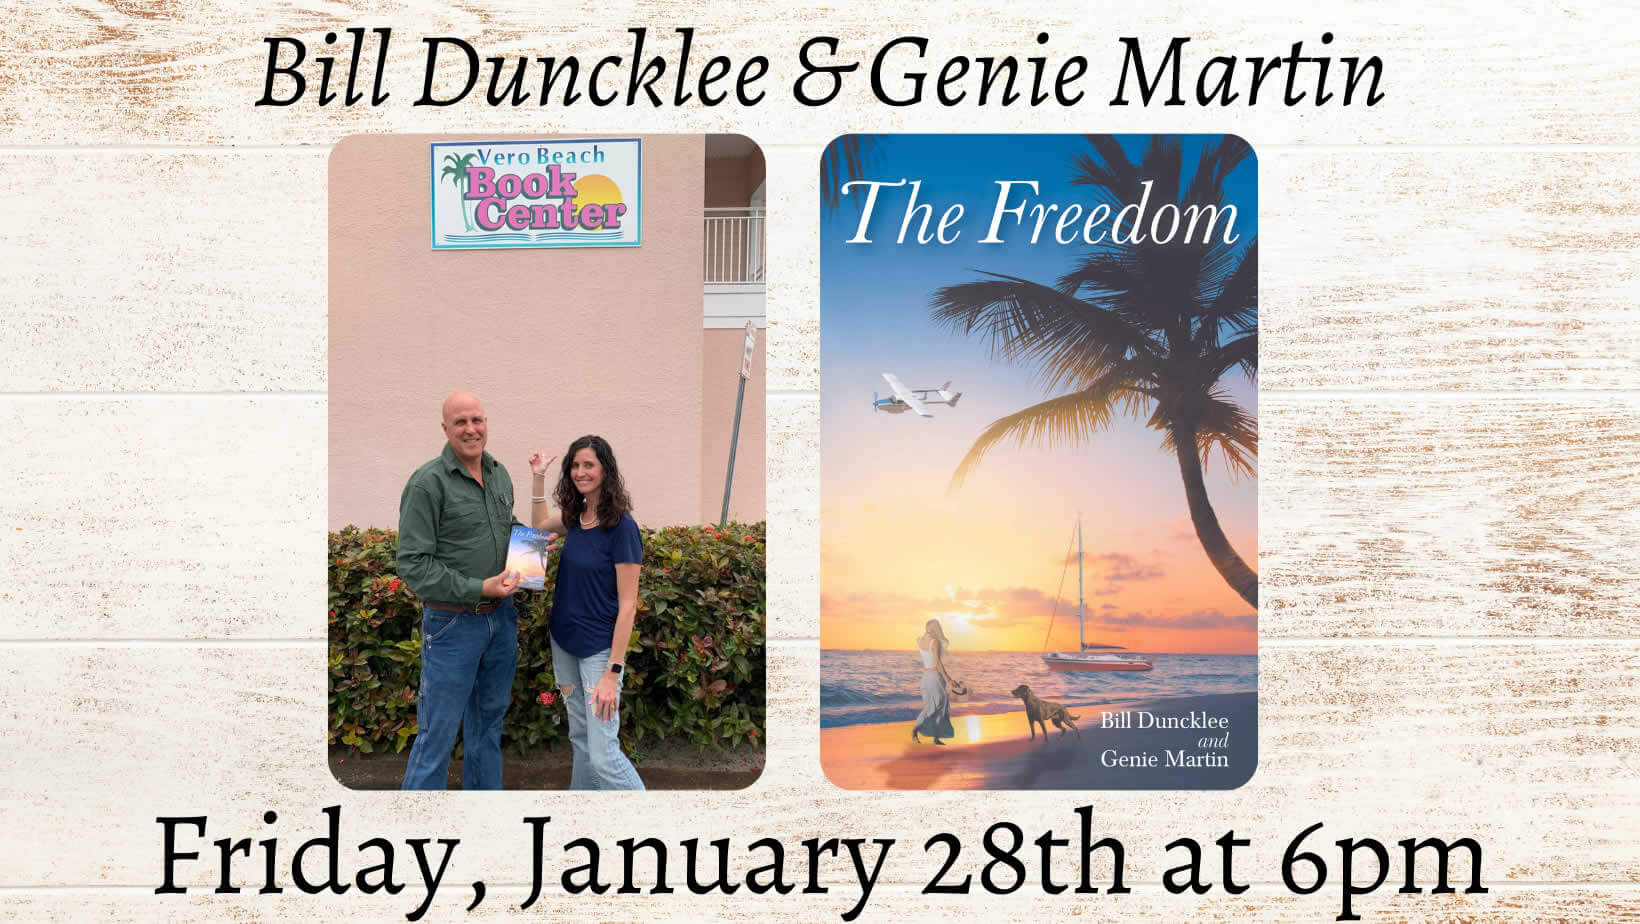 Bill-Duncklee-and-Genie-Martin-present-The-Freedom.jpg